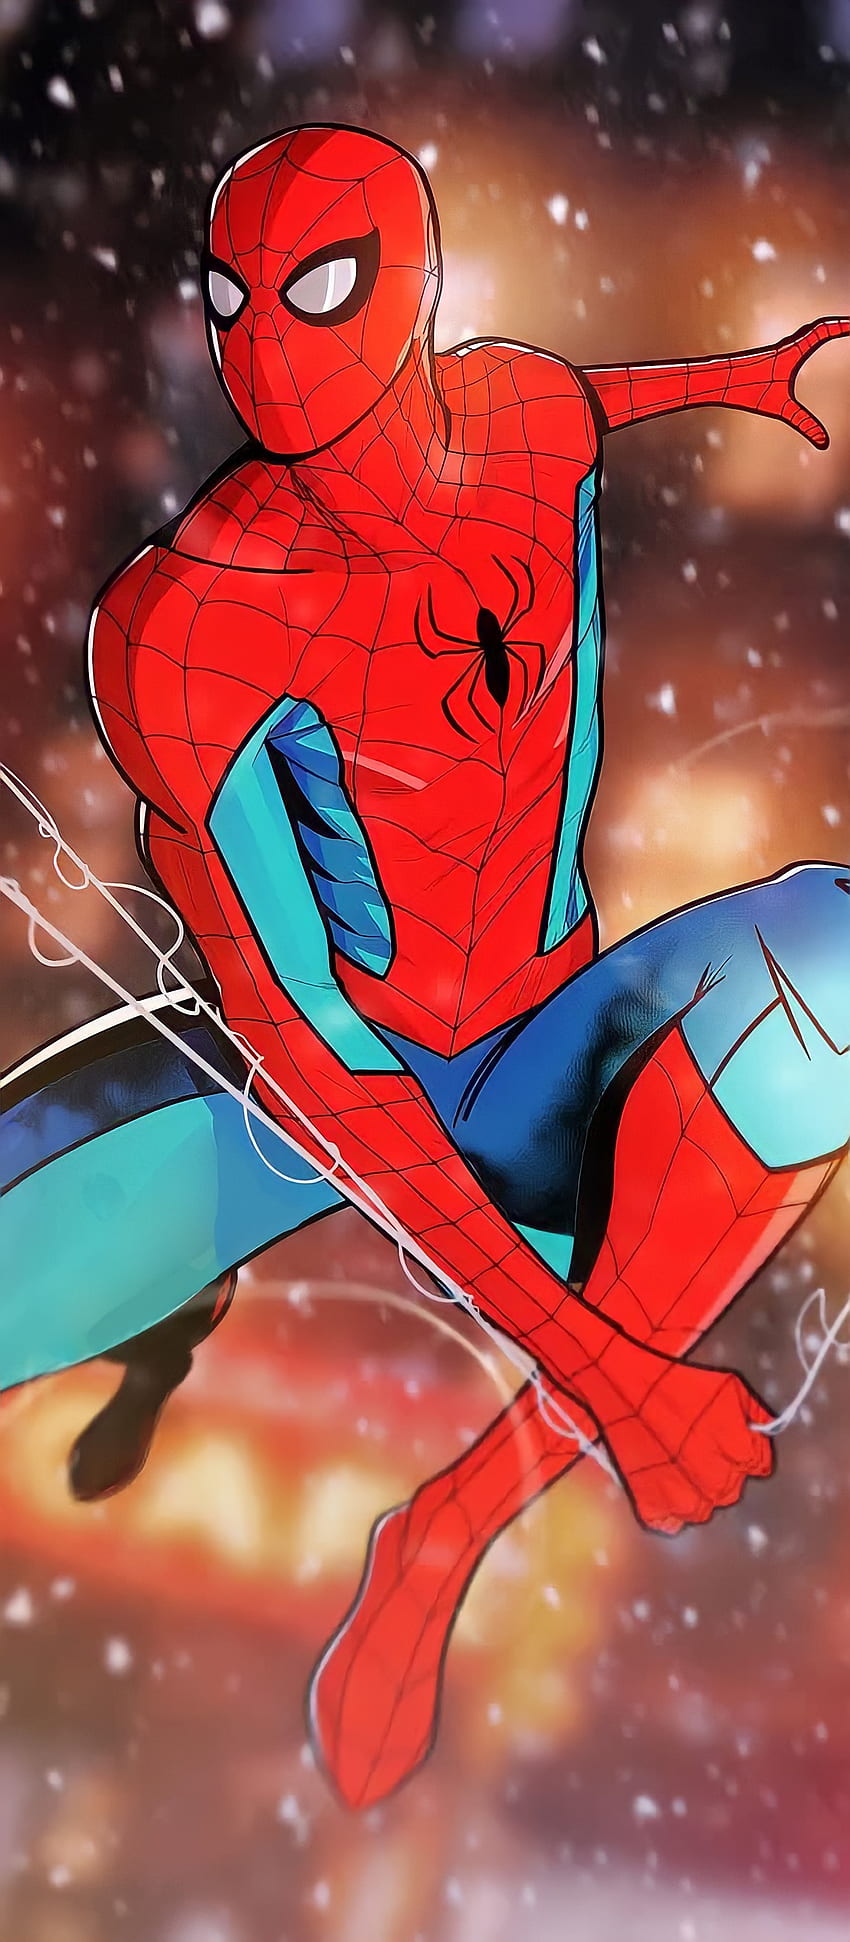 New Spider-Man NWH, Superheroes, Tobey Maguire, Peter Parker, Andrew Garfield, Spiderverse, New spiderman, Marvel, Drawings, Spiderman no way home, Venom, Tom Holland, Comics, MCU, Spiderman HD phone wallpaper